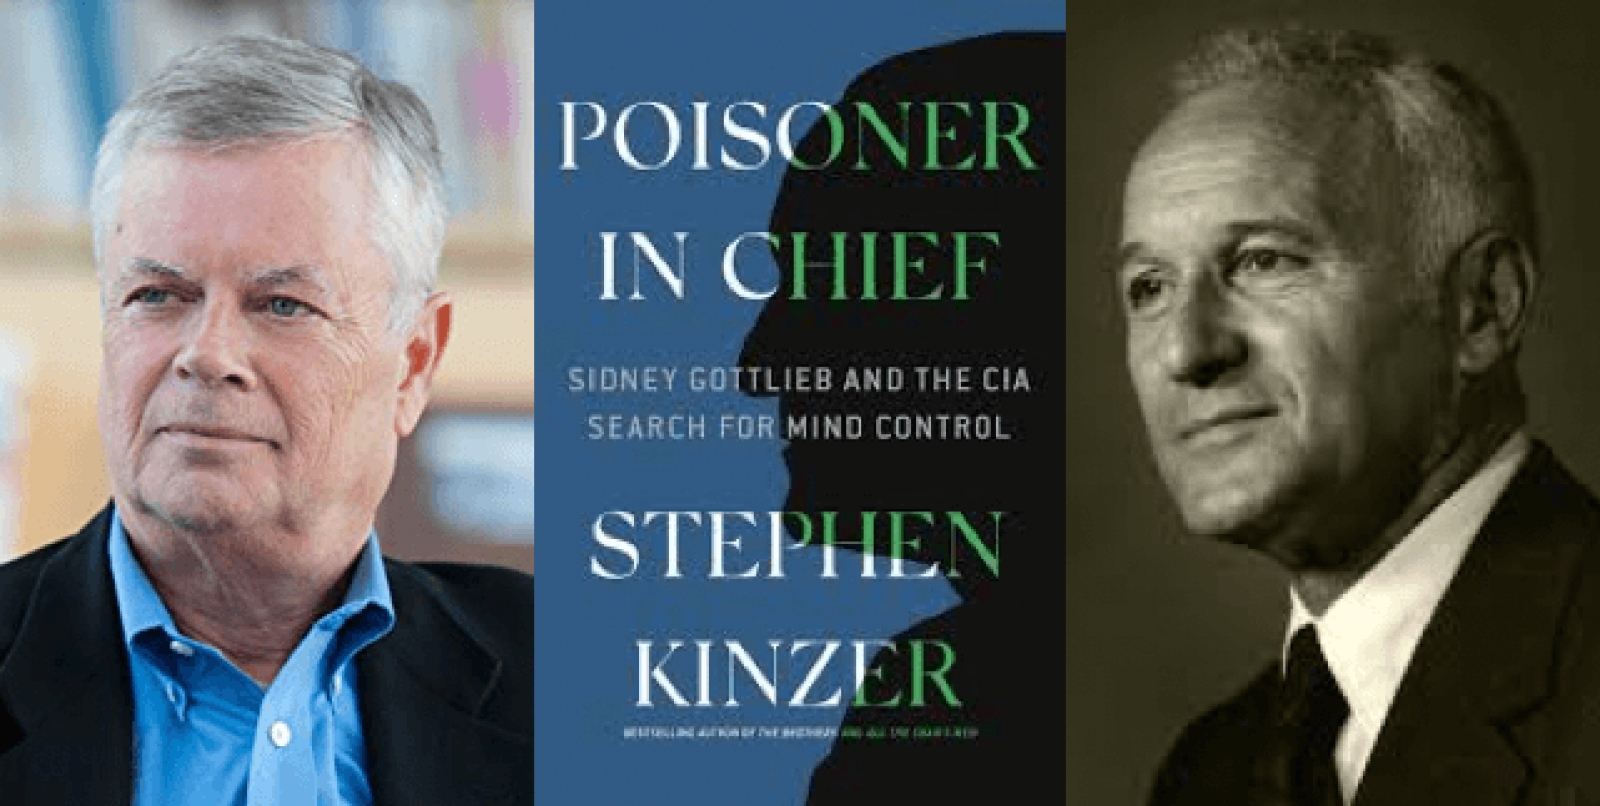 Review of Stephen Kinzer, Poisoner in Chief:  Sidney Gottlieb and the CIA Search for Mind Control (Henry Holt and Co., 2019)